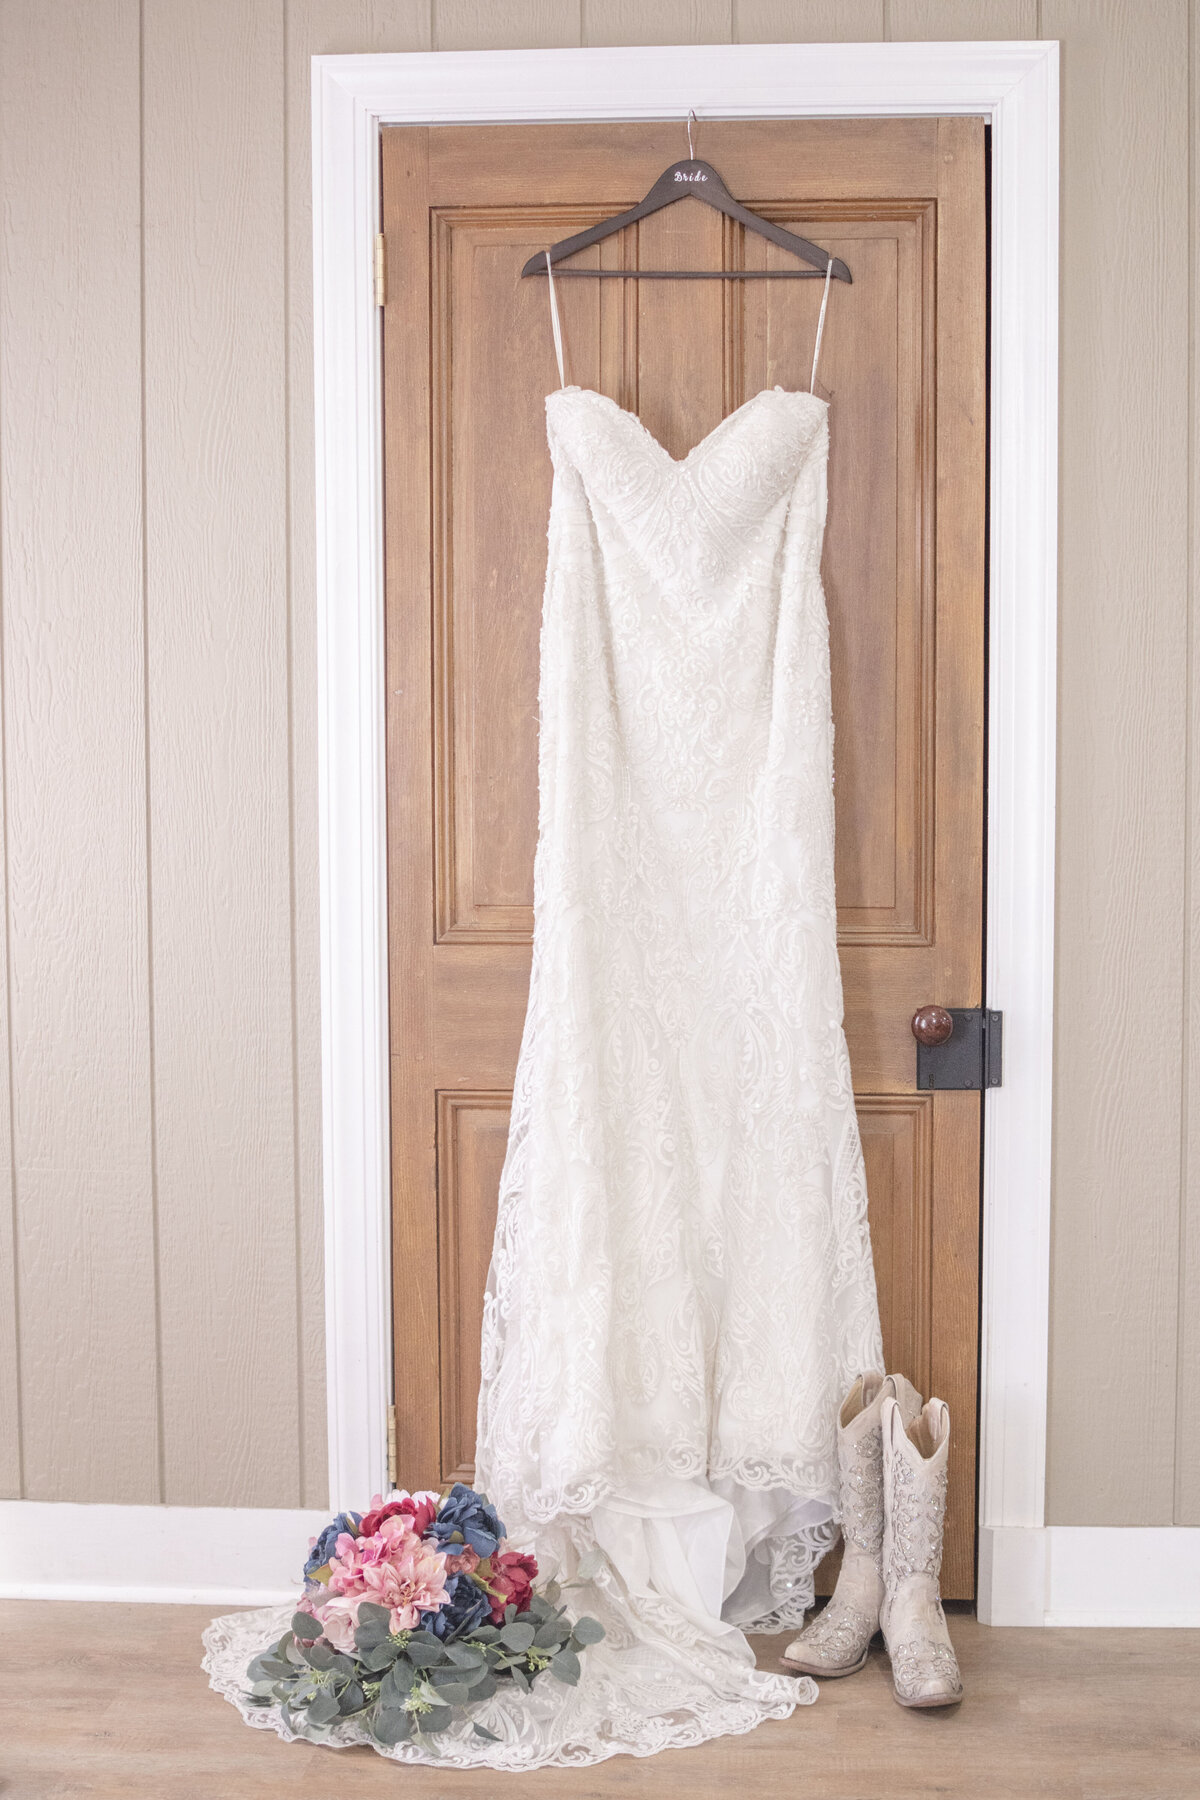 Wedding dress hanging with bouquet and boots